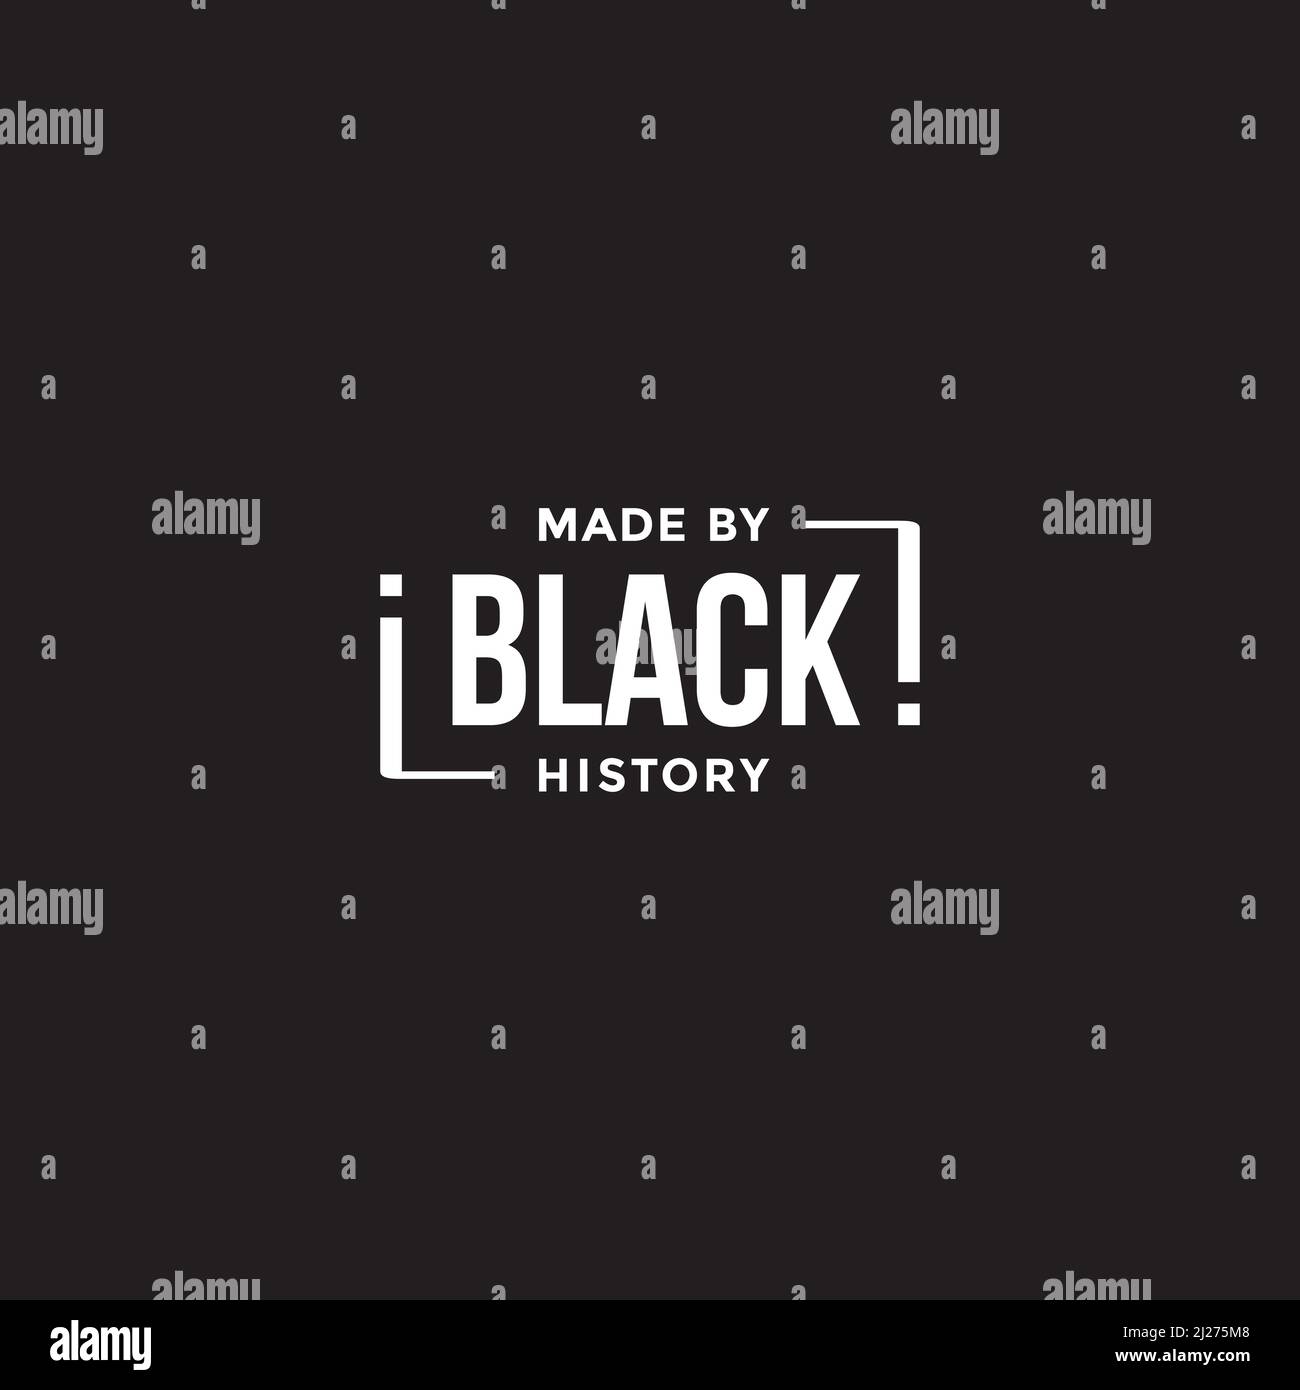 Made by Black History wordmark design Stock Vector